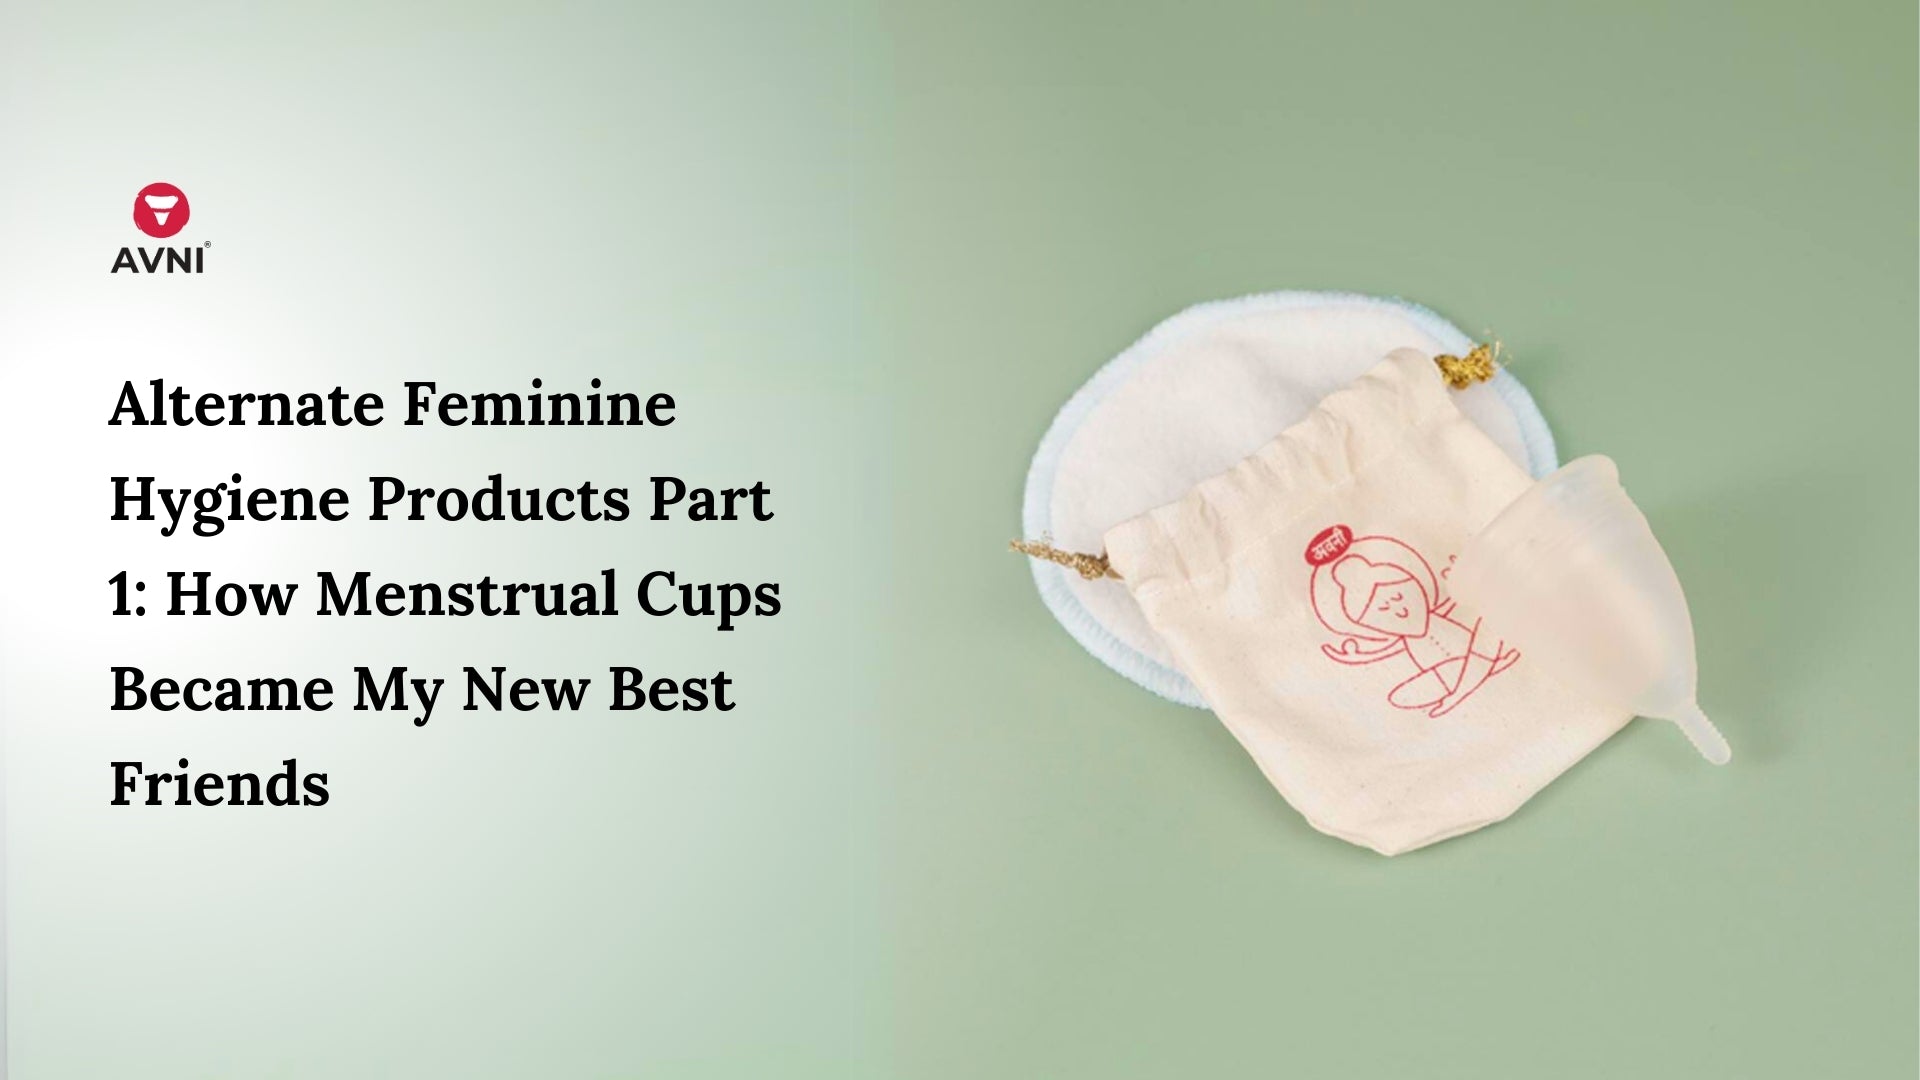 Alternate Feminine Hygiene Products Part 1: How Menstrual Cups Became My New Best Friends